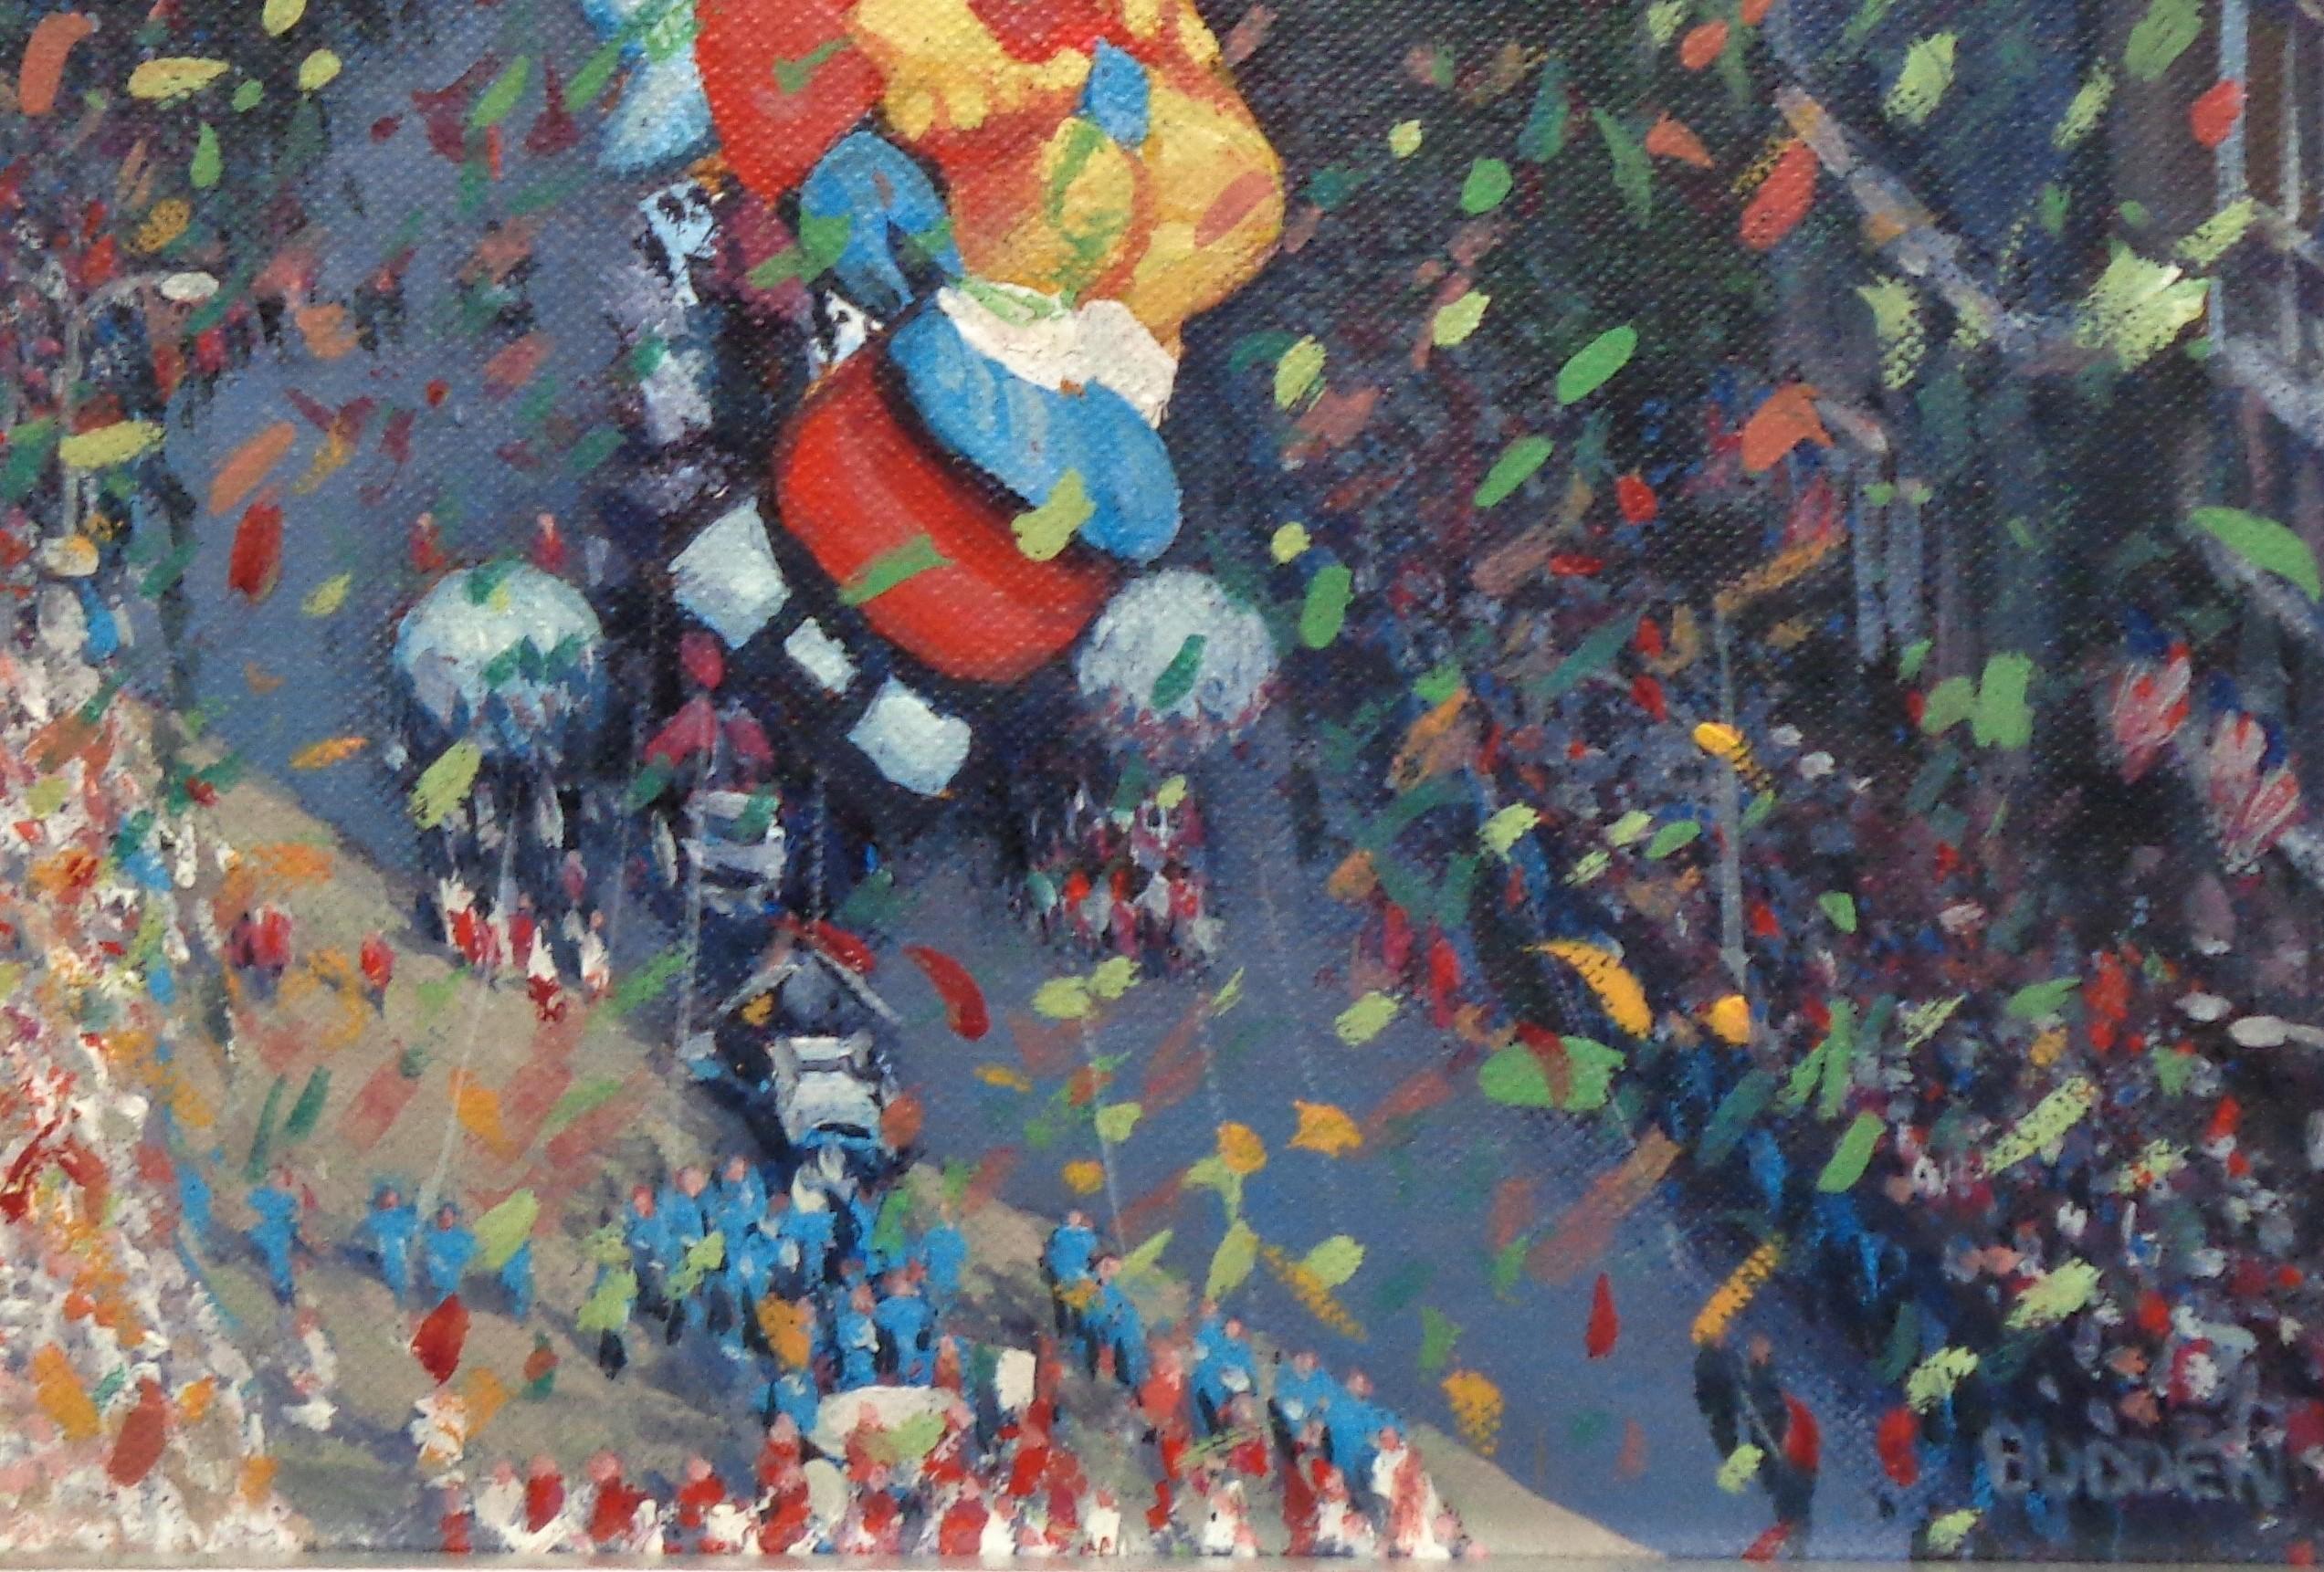   NYC Landscape Oil Painting Michael Budden Macy's Parade Series Bart Simpson 3